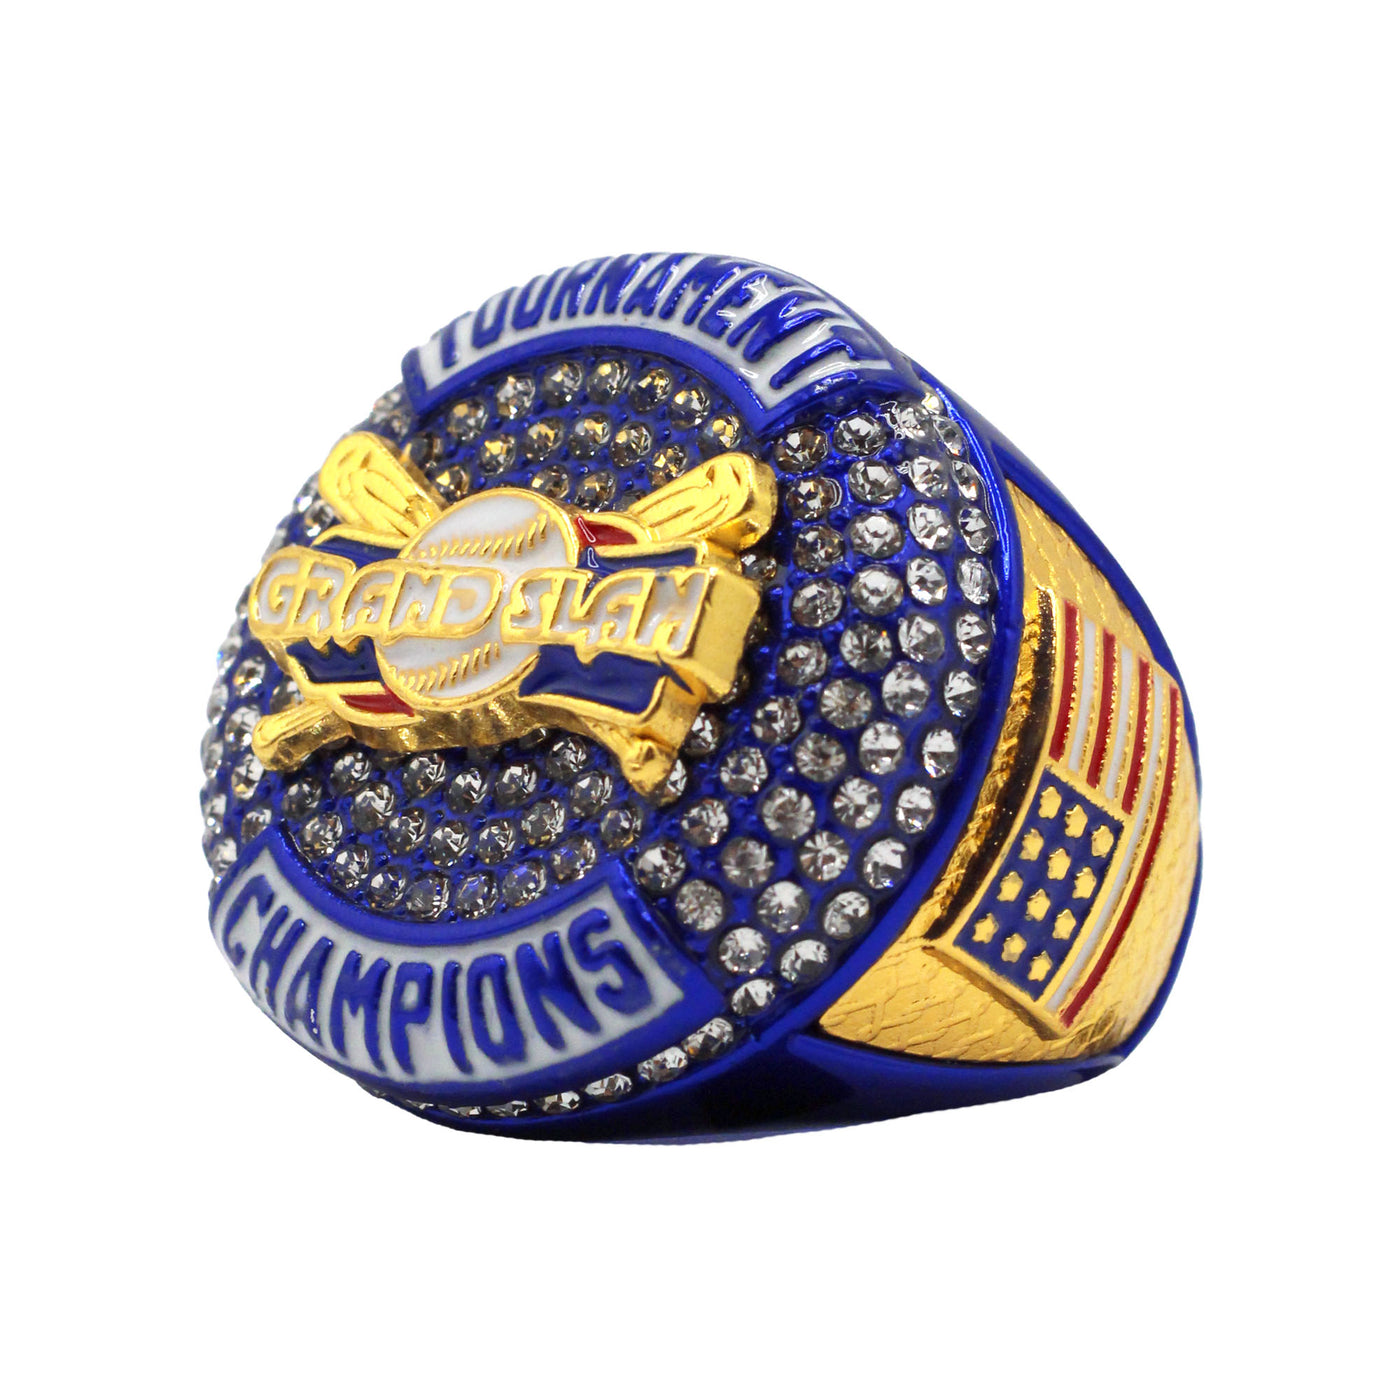 GS24 BLUE CHAMPIONS RING